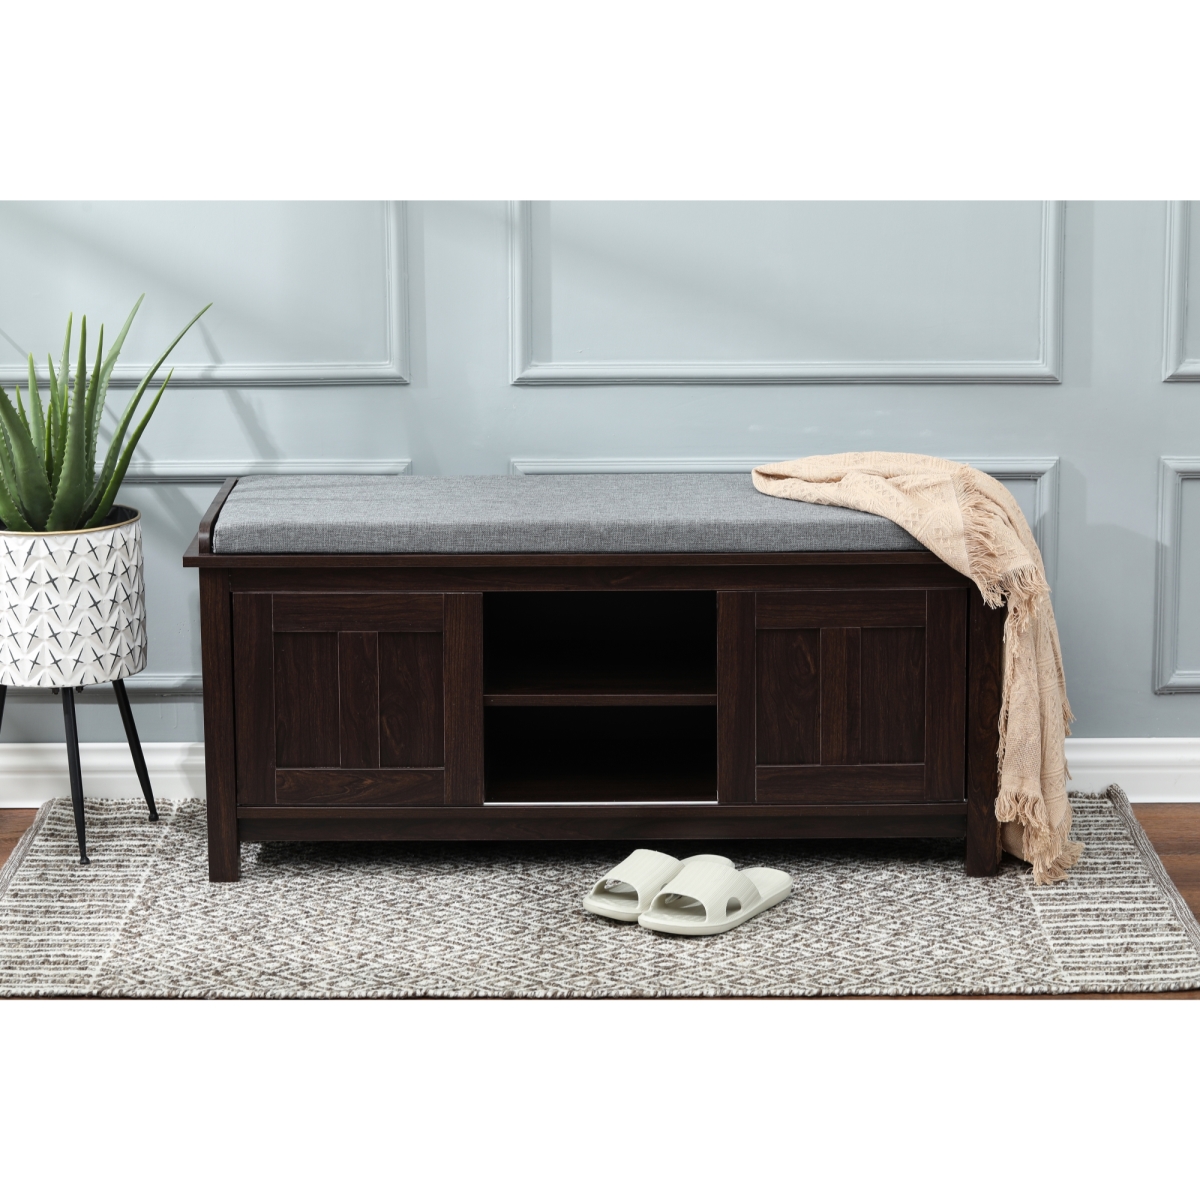 Whif1154 Wood Storage Bench, Upholstered Brown